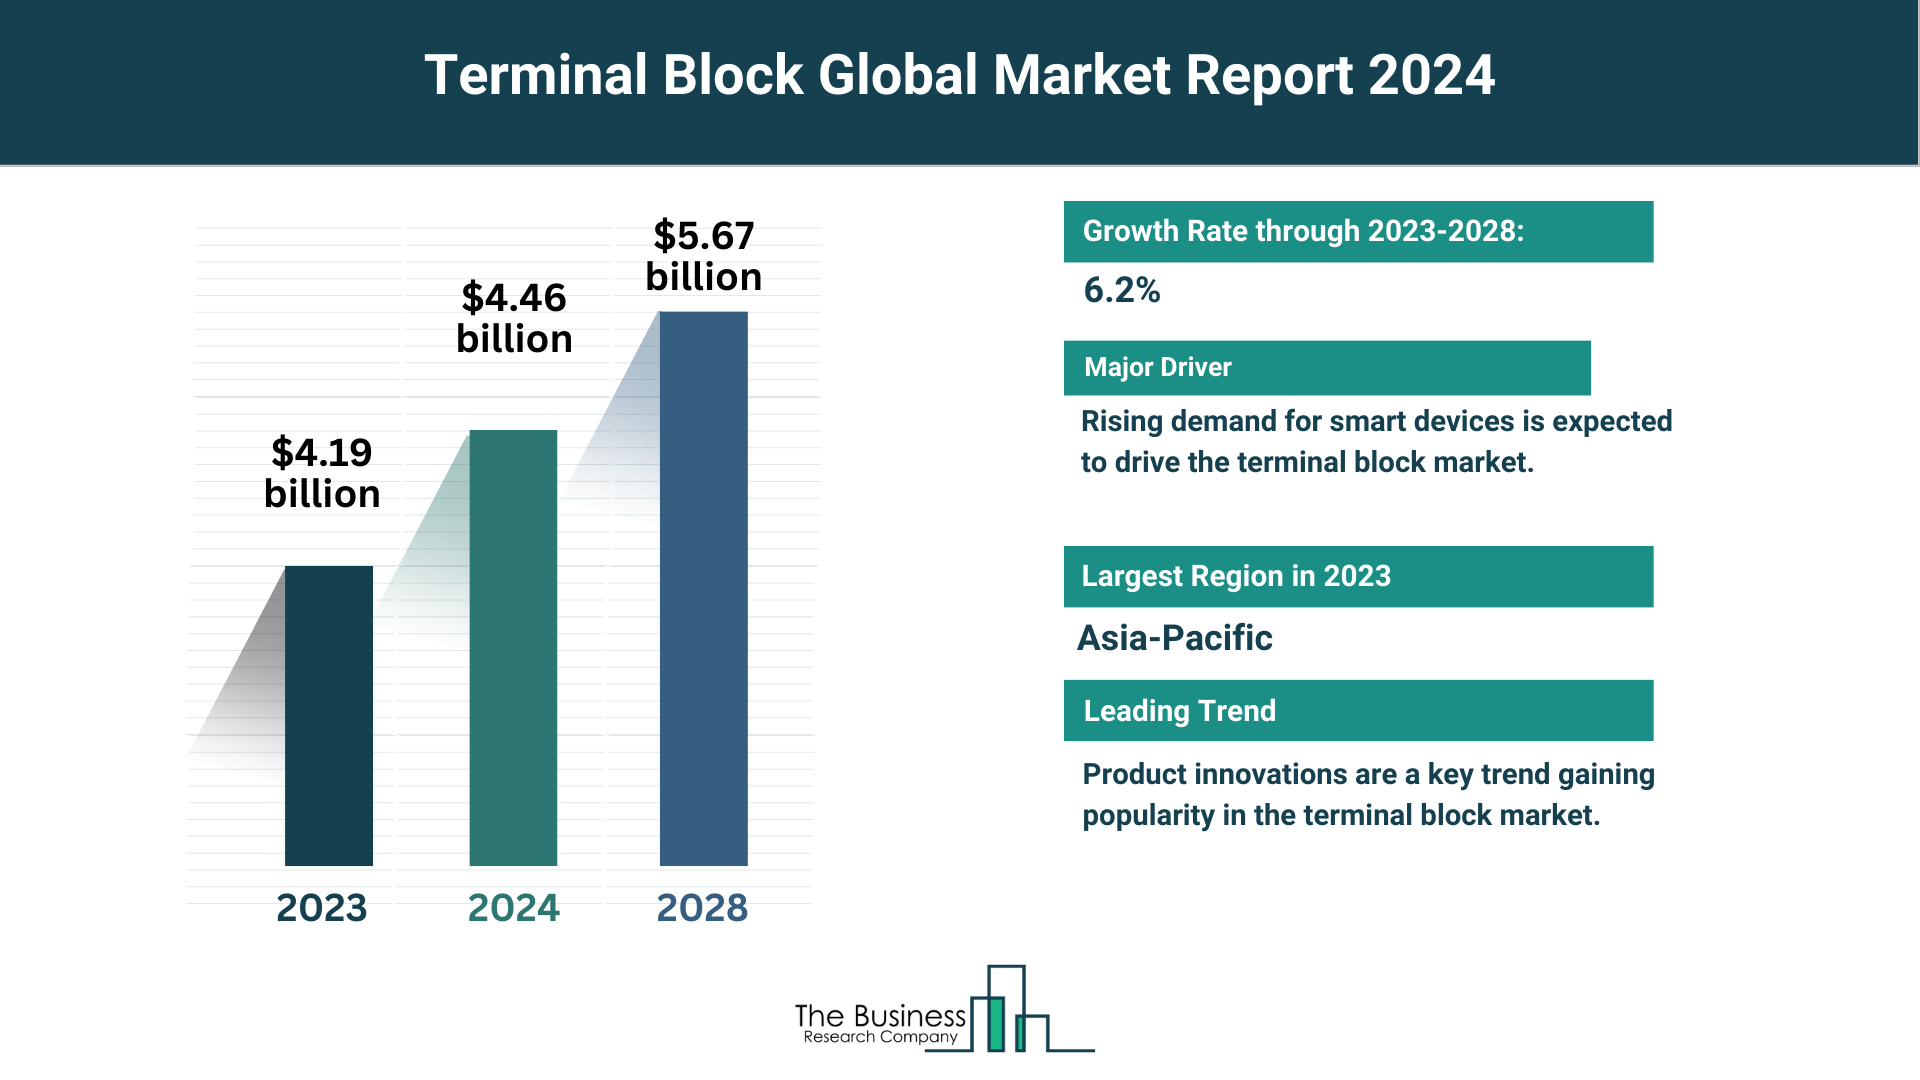 What Are The 5 Top Insights From The Terminal Block Market Forecast 2024